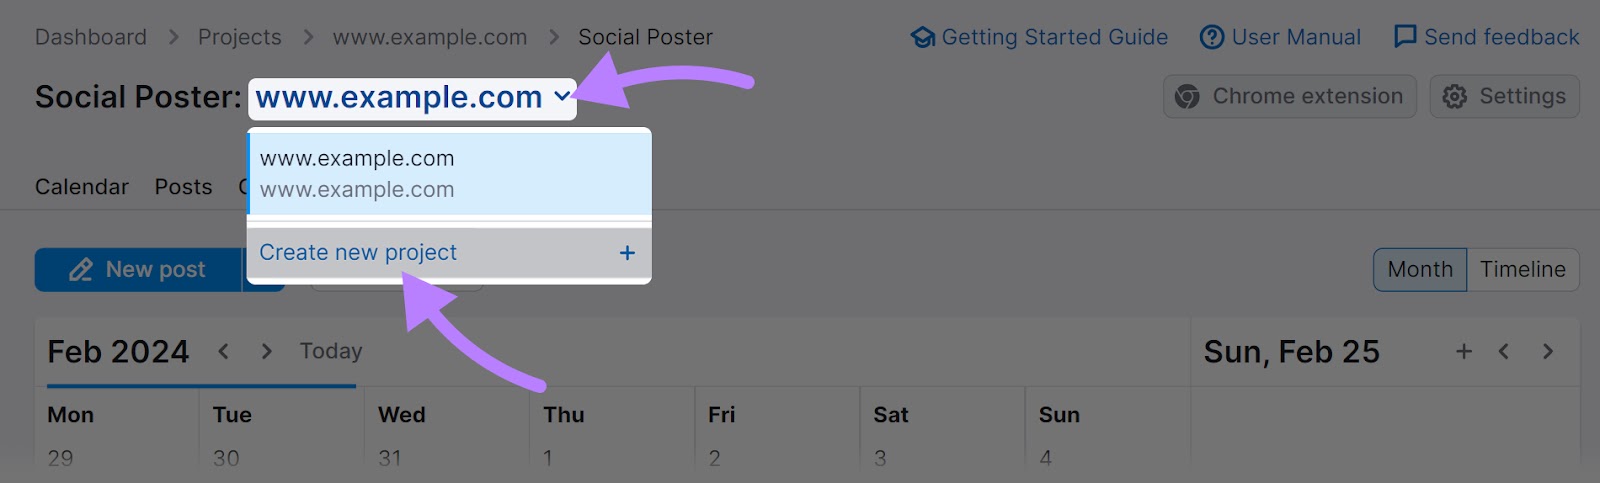 "Create new project" button in Social Poster